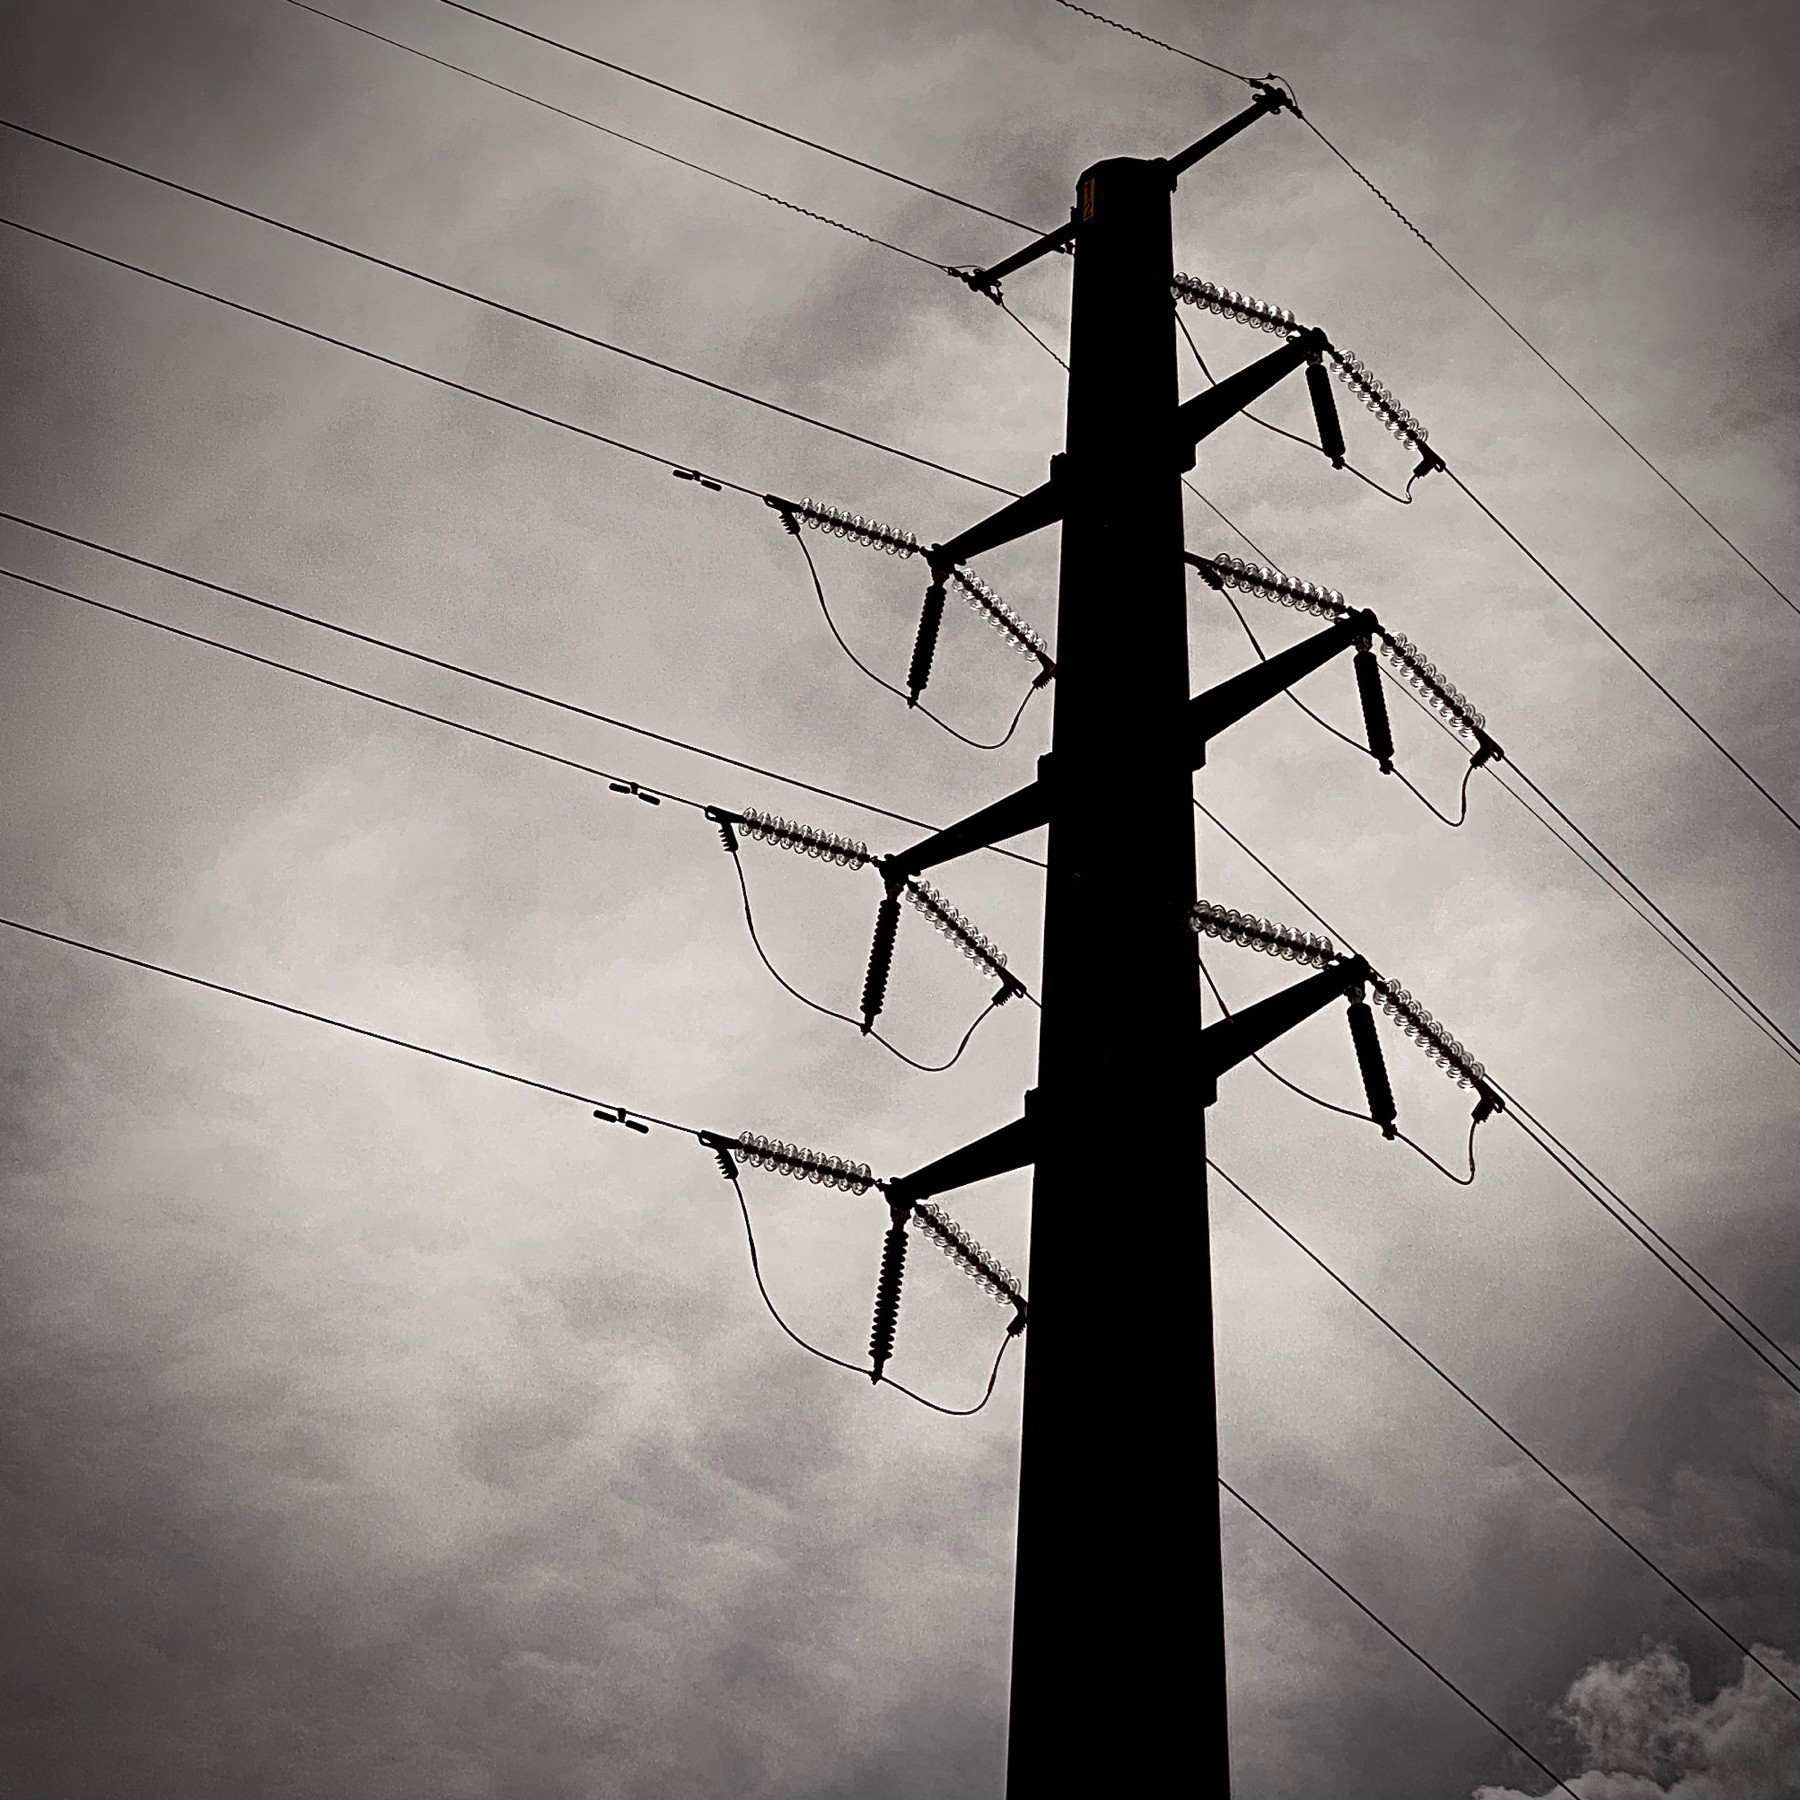 High tension wires, black and white, cloudy sky